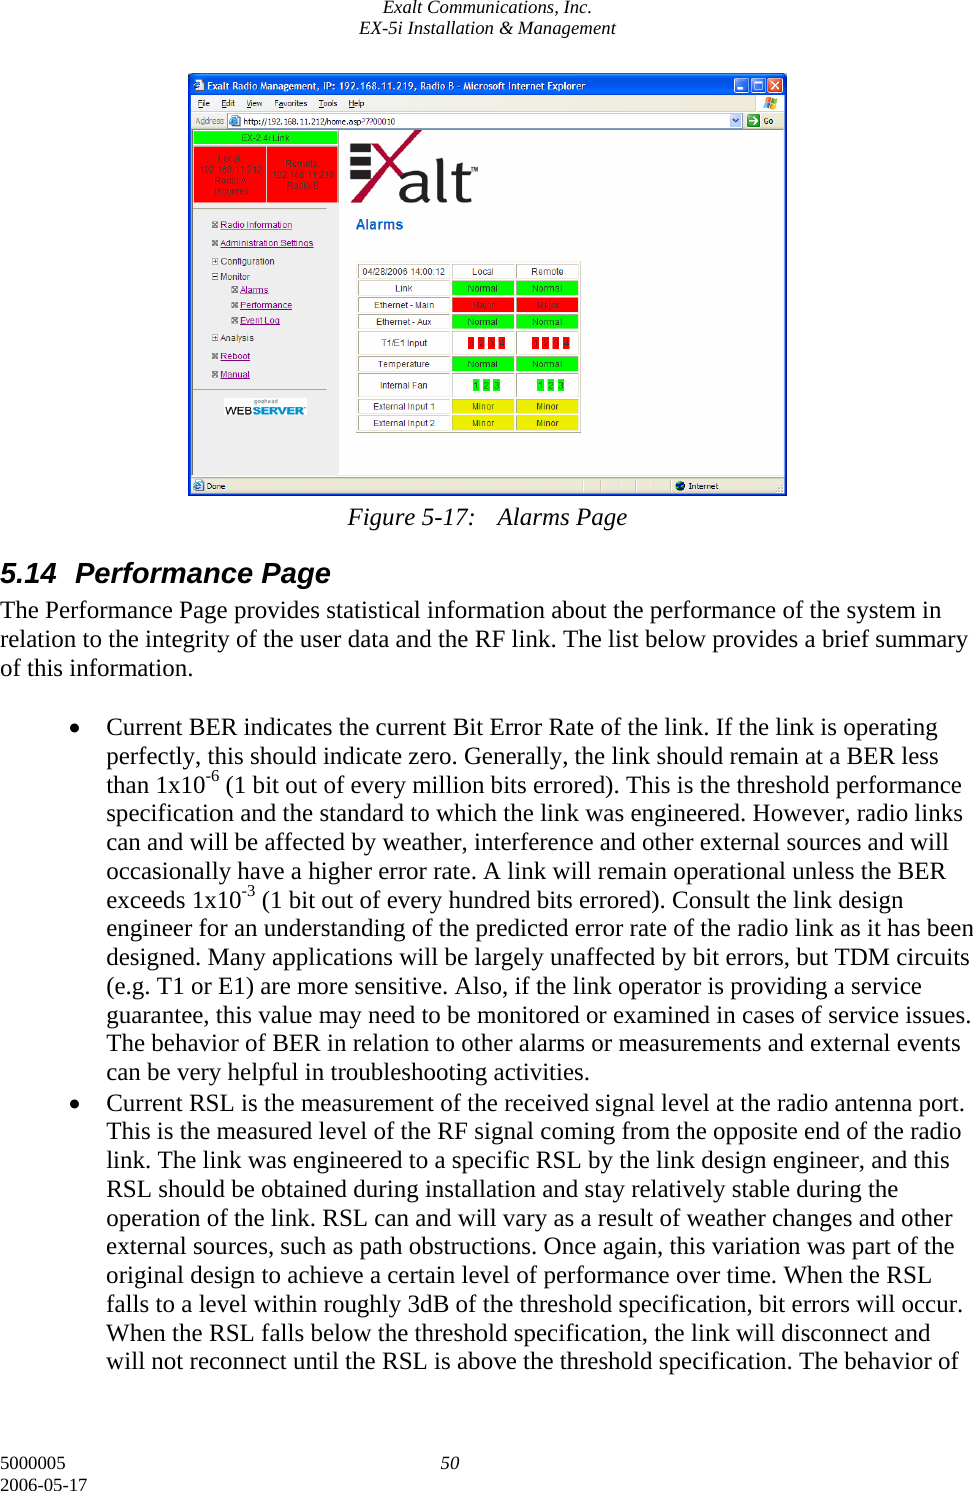 Exalt Communications, Inc. EX-5i Installation &amp; Management 5000005  50 2006-05-17                Figure 5-17:  Alarms Page 5.14 Performance Page The Performance Page provides statistical information about the performance of the system in relation to the integrity of the user data and the RF link. The list below provides a brief summary of this information.  • Current BER indicates the current Bit Error Rate of the link. If the link is operating perfectly, this should indicate zero. Generally, the link should remain at a BER less than 1x10-6 (1 bit out of every million bits errored). This is the threshold performance specification and the standard to which the link was engineered. However, radio links can and will be affected by weather, interference and other external sources and will occasionally have a higher error rate. A link will remain operational unless the BER exceeds 1x10-3 (1 bit out of every hundred bits errored). Consult the link design engineer for an understanding of the predicted error rate of the radio link as it has been designed. Many applications will be largely unaffected by bit errors, but TDM circuits (e.g. T1 or E1) are more sensitive. Also, if the link operator is providing a service guarantee, this value may need to be monitored or examined in cases of service issues. The behavior of BER in relation to other alarms or measurements and external events can be very helpful in troubleshooting activities. • Current RSL is the measurement of the received signal level at the radio antenna port. This is the measured level of the RF signal coming from the opposite end of the radio link. The link was engineered to a specific RSL by the link design engineer, and this RSL should be obtained during installation and stay relatively stable during the operation of the link. RSL can and will vary as a result of weather changes and other external sources, such as path obstructions. Once again, this variation was part of the original design to achieve a certain level of performance over time. When the RSL falls to a level within roughly 3dB of the threshold specification, bit errors will occur. When the RSL falls below the threshold specification, the link will disconnect and will not reconnect until the RSL is above the threshold specification. The behavior of 